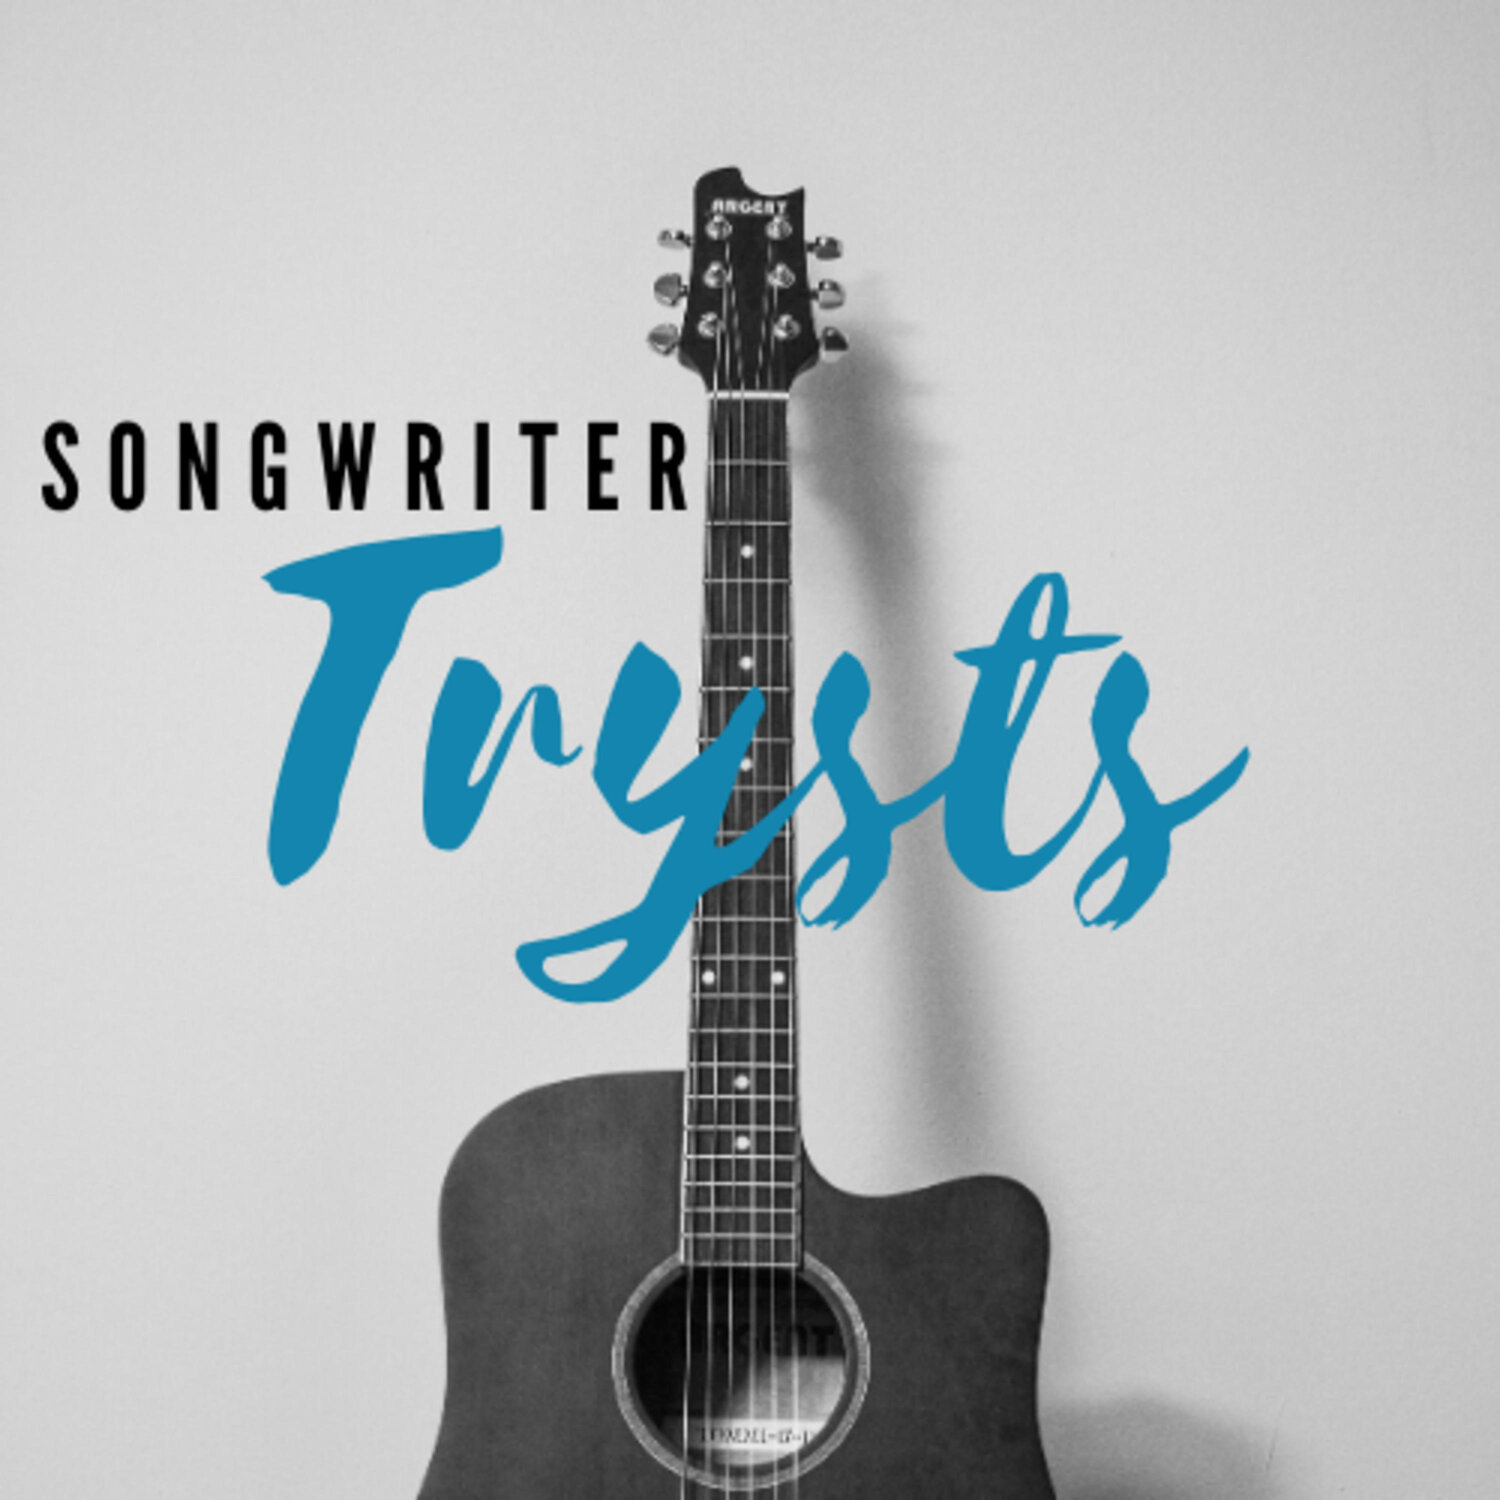 Songwriter Trysts